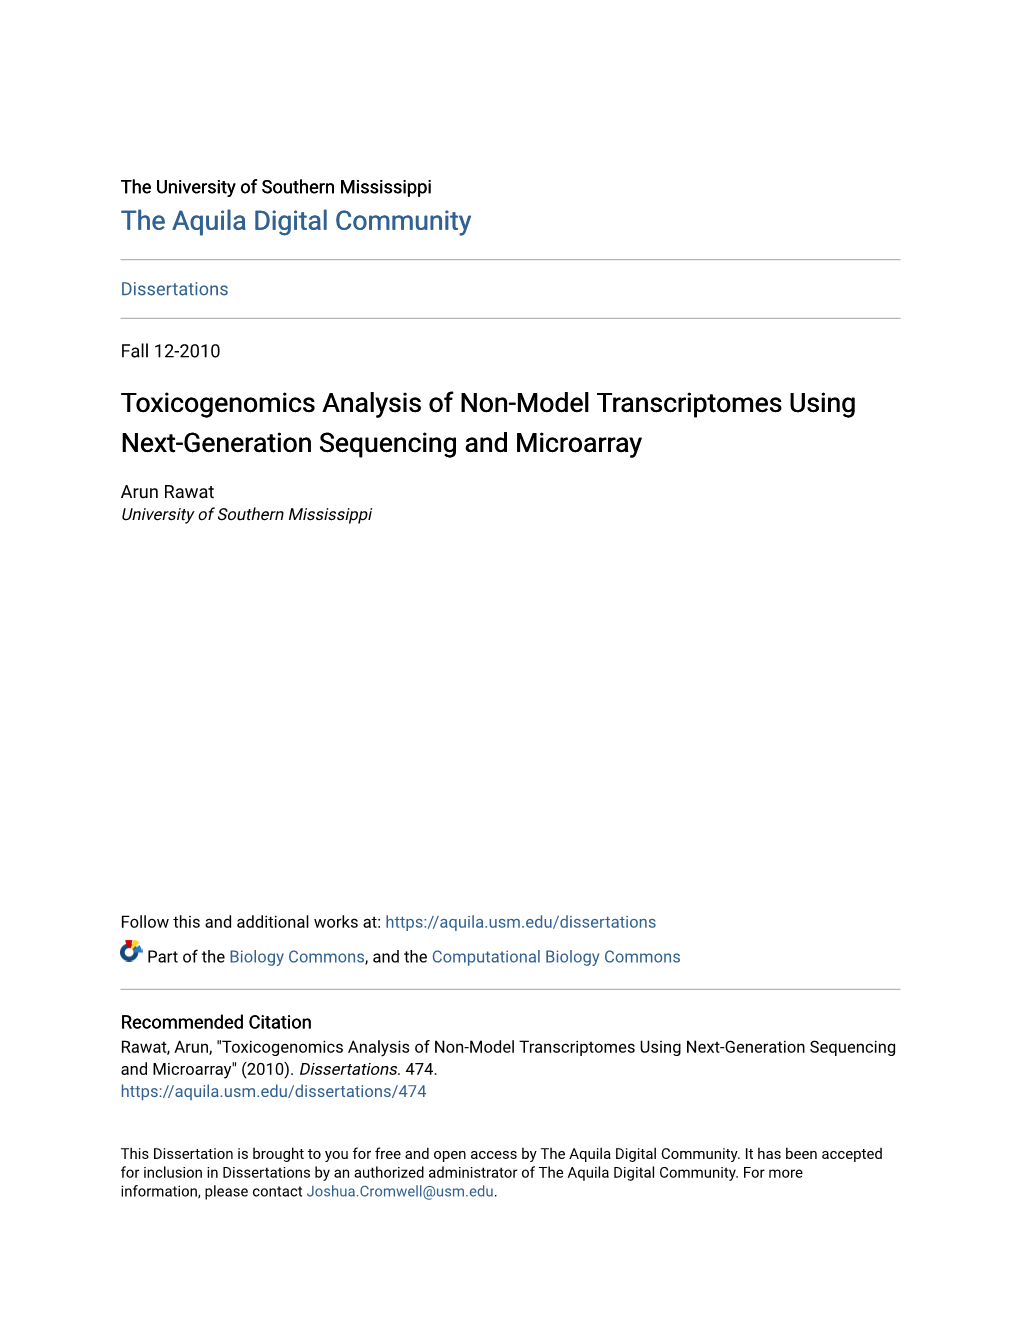 Toxicogenomics Analysis of Non-Model Transcriptomes Using Next-Generation Sequencing and Microarray